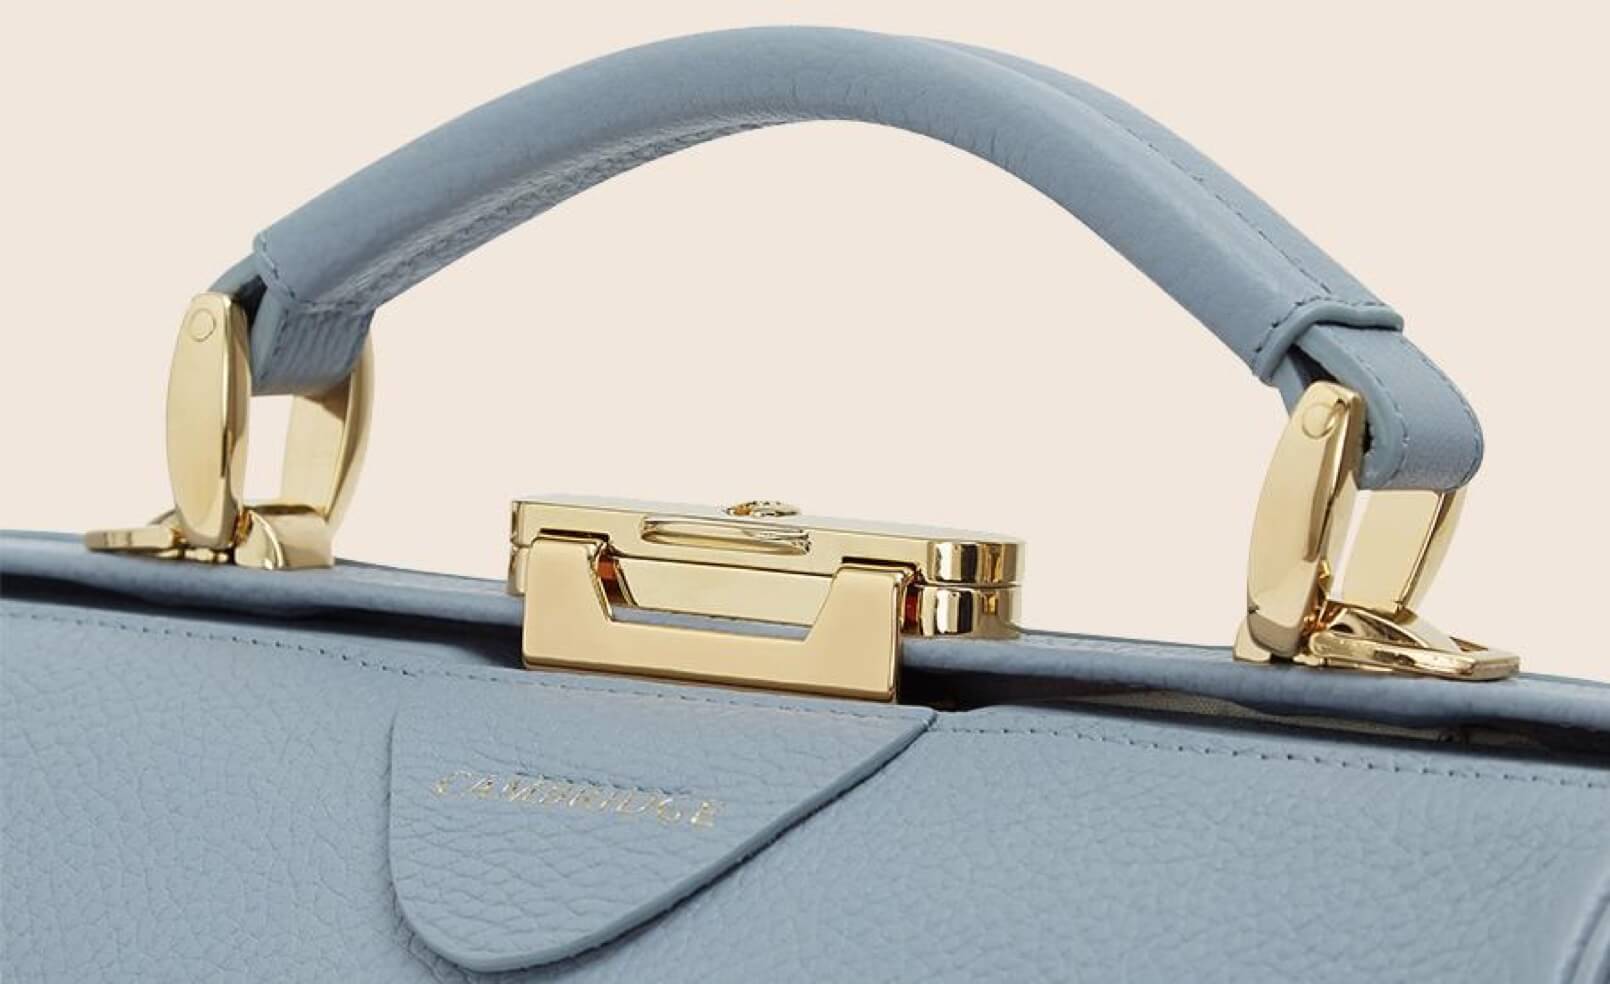 A closeup of a sky blue satchel handle with gold buckles. The leather detail and stitching is stunning.